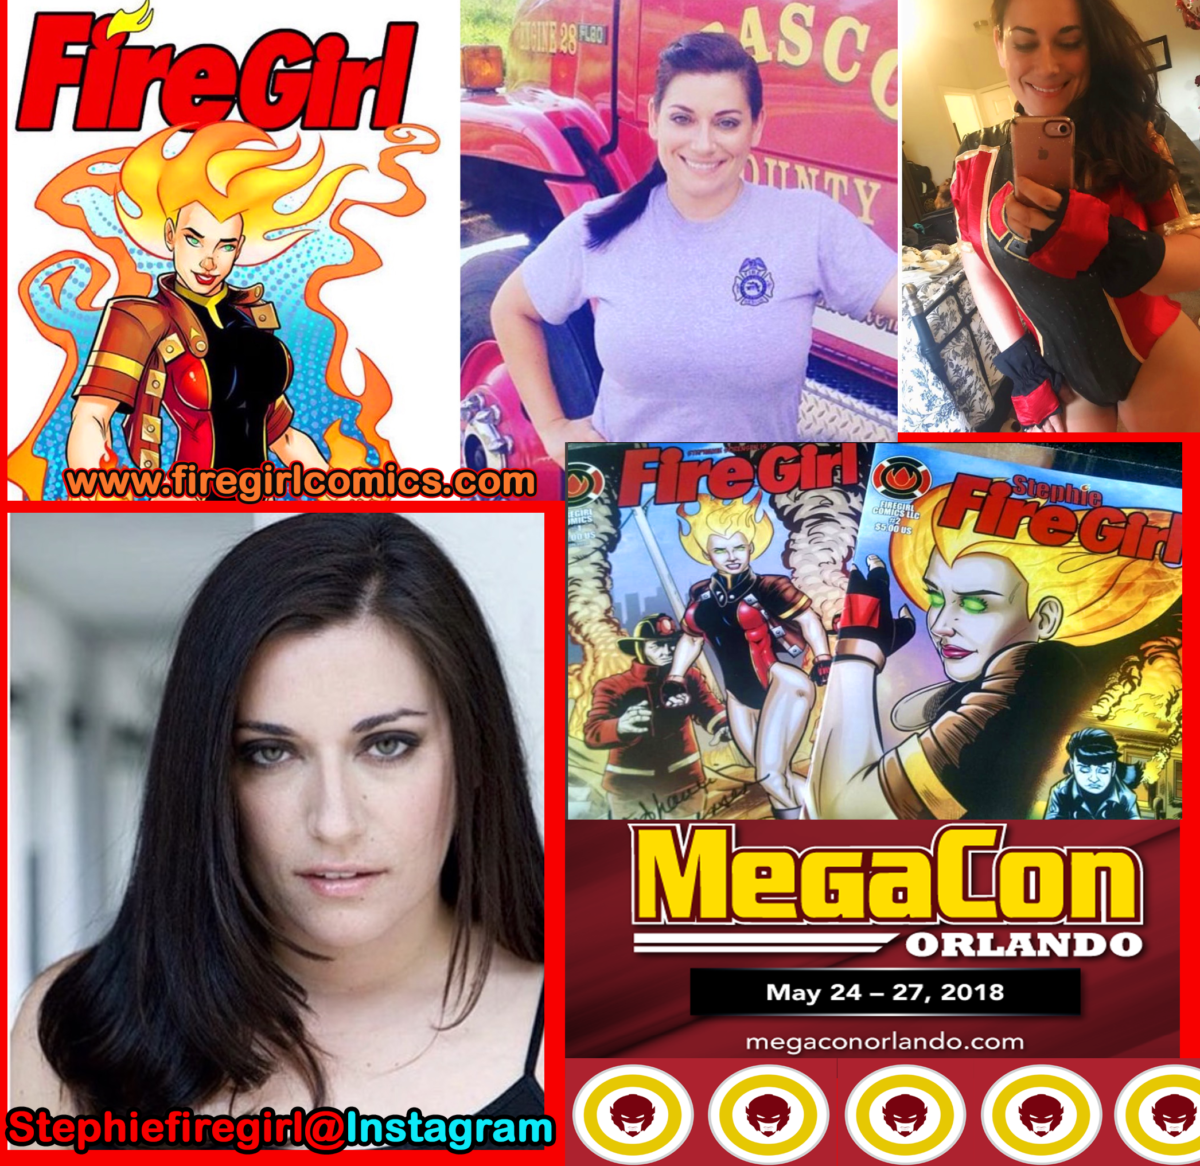 COMIC CON HIGHWAY MEGA EXITING  in FLORIDA::  MEGA CON ORLANDO on May 24-27 will be SET a BLAZE by STEPHIE  aka FIRE GIRL